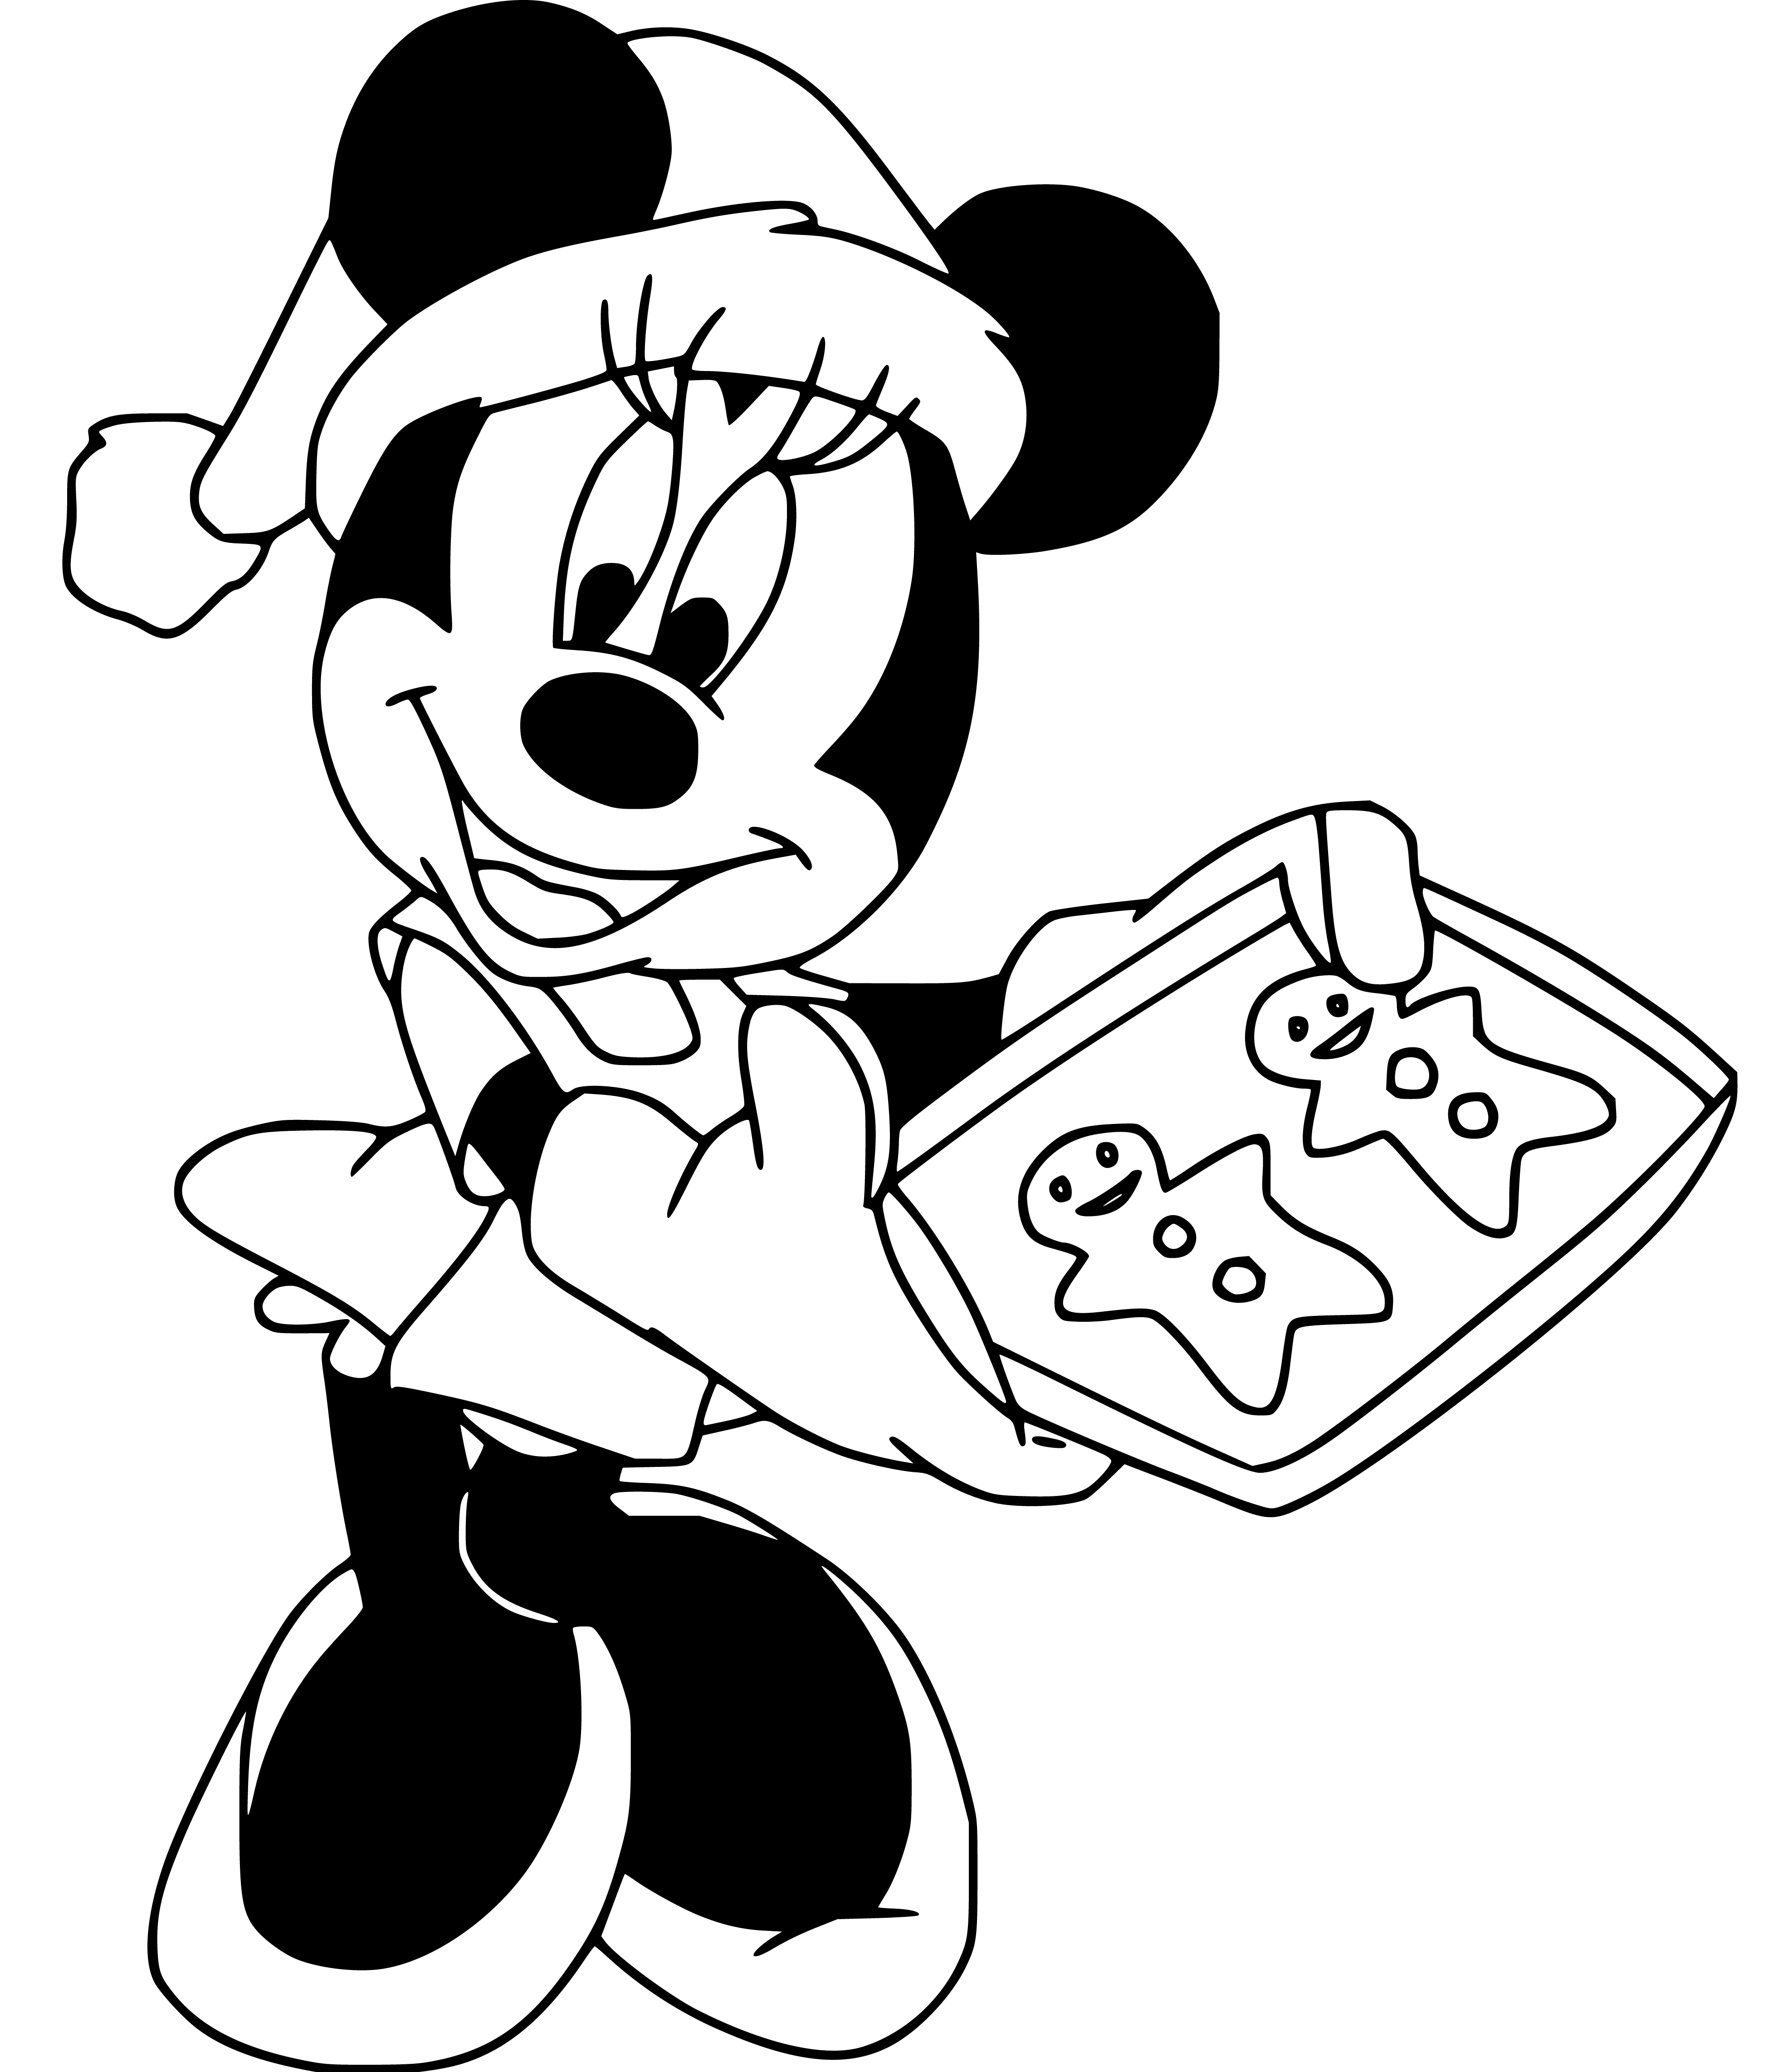 Minnie Mouse black white coloring page easy for kids - SheetalColor.com